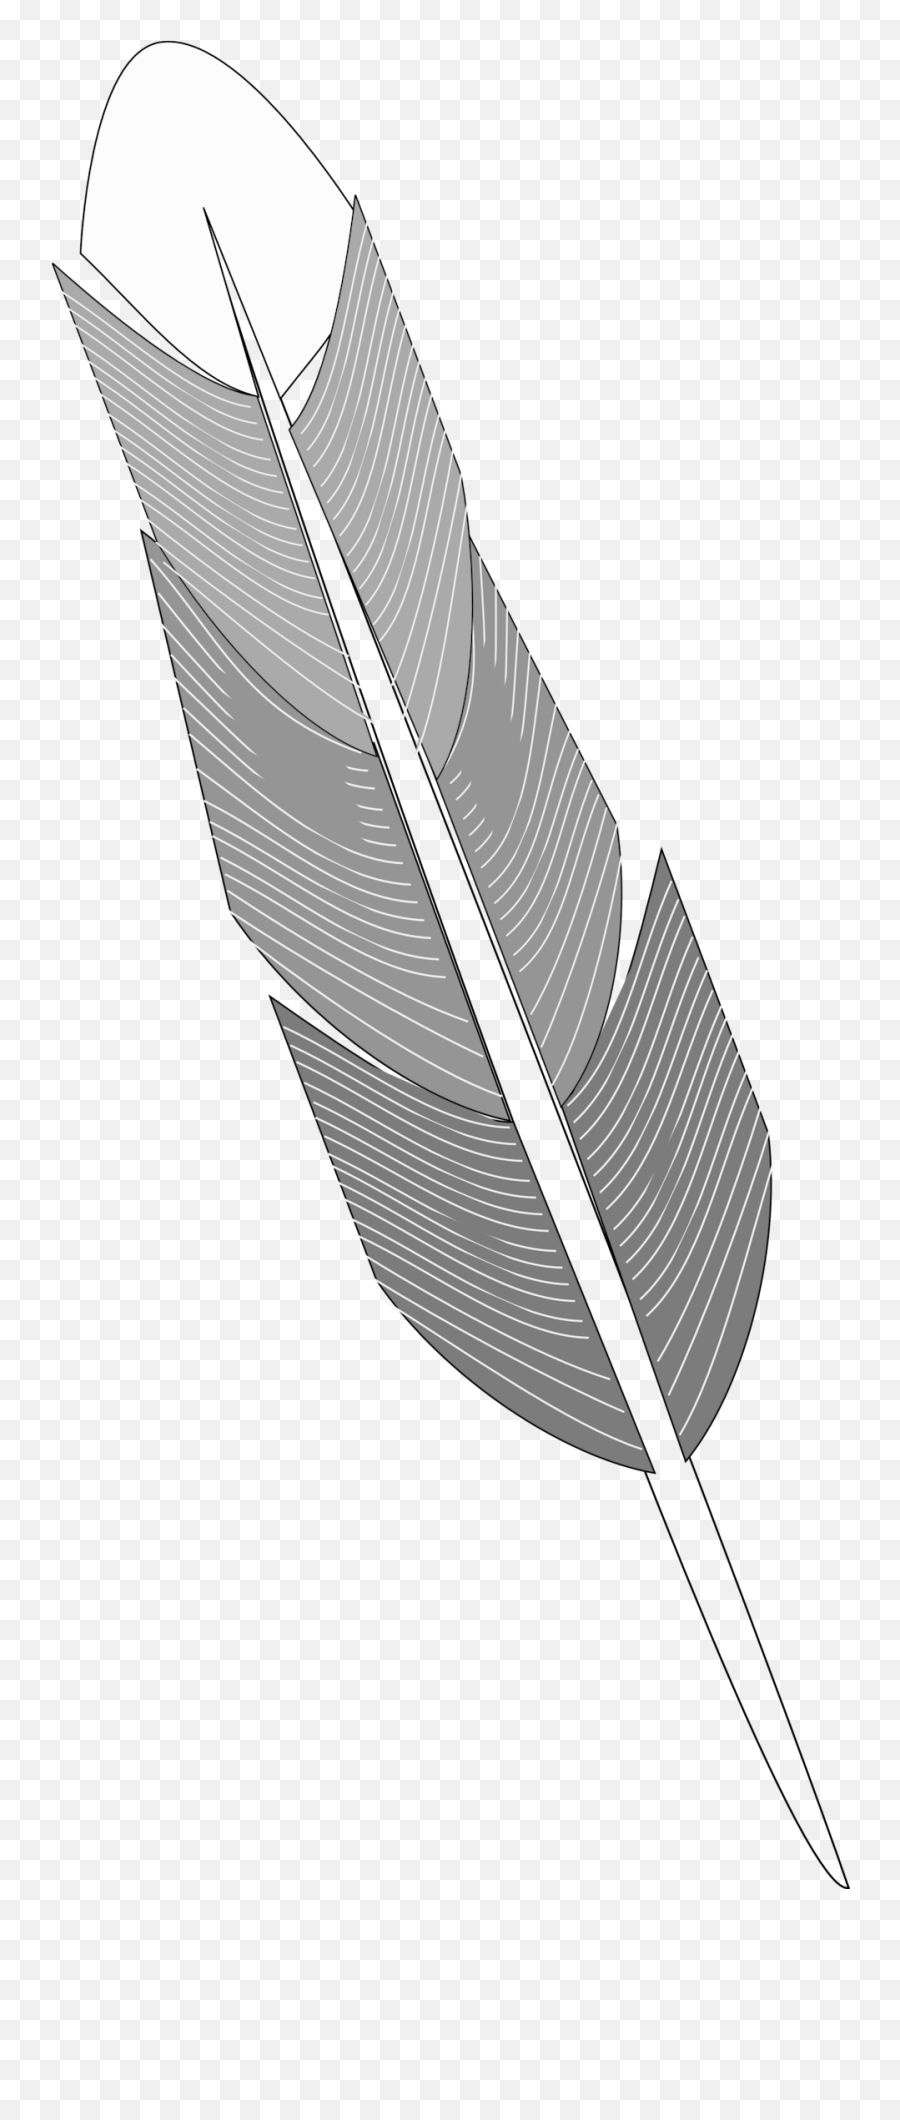 Public Domain Clip Art Image Grayscale Feather Id - Portable Network Graphics Emoji,Feathers Clipart